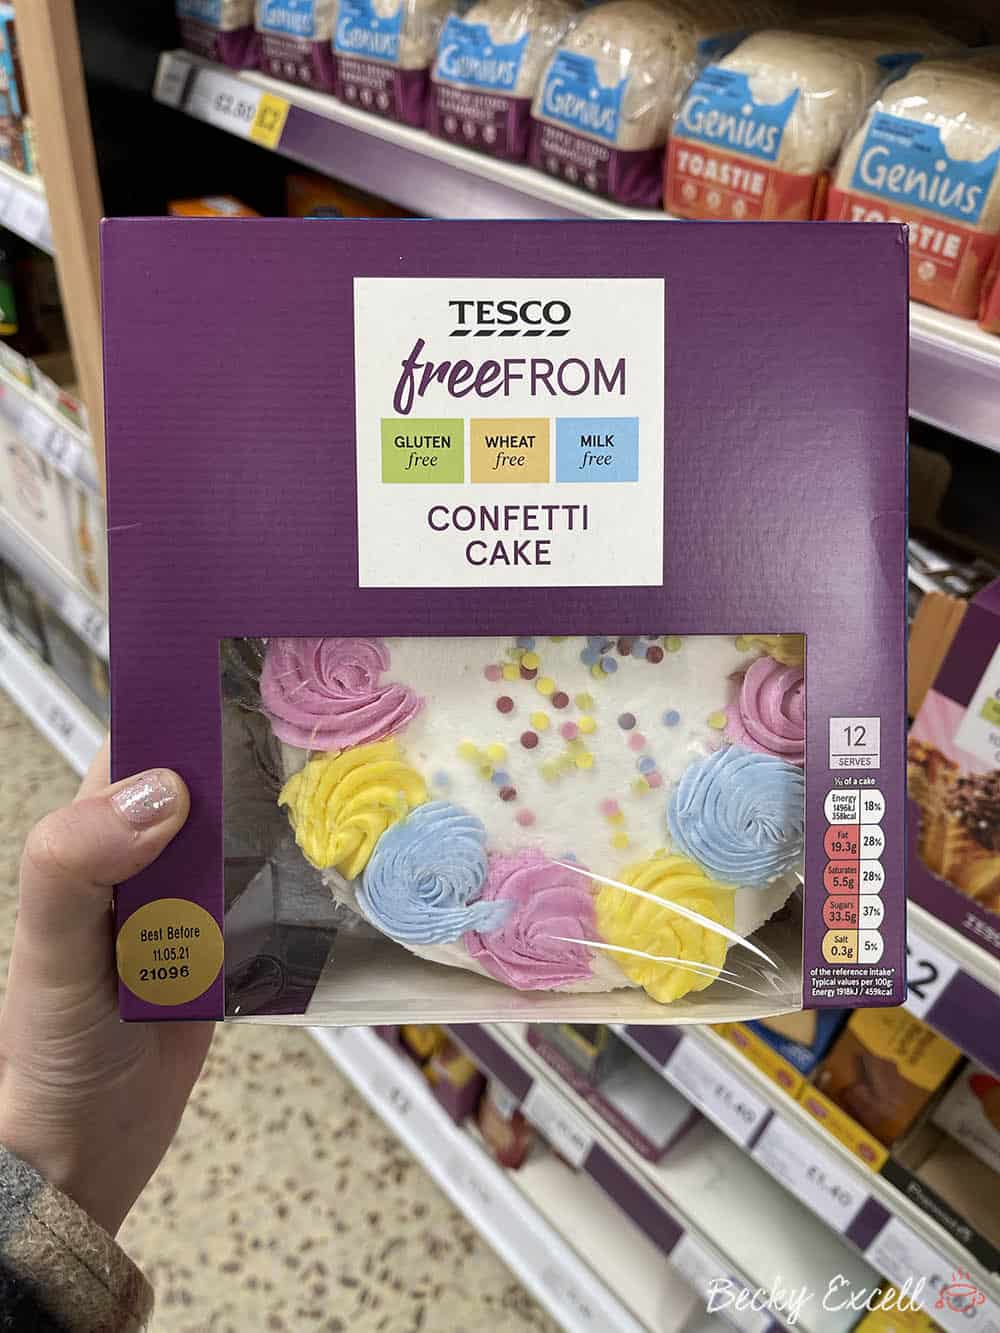 25 NEW products in Tesco's gluten-free range 2021